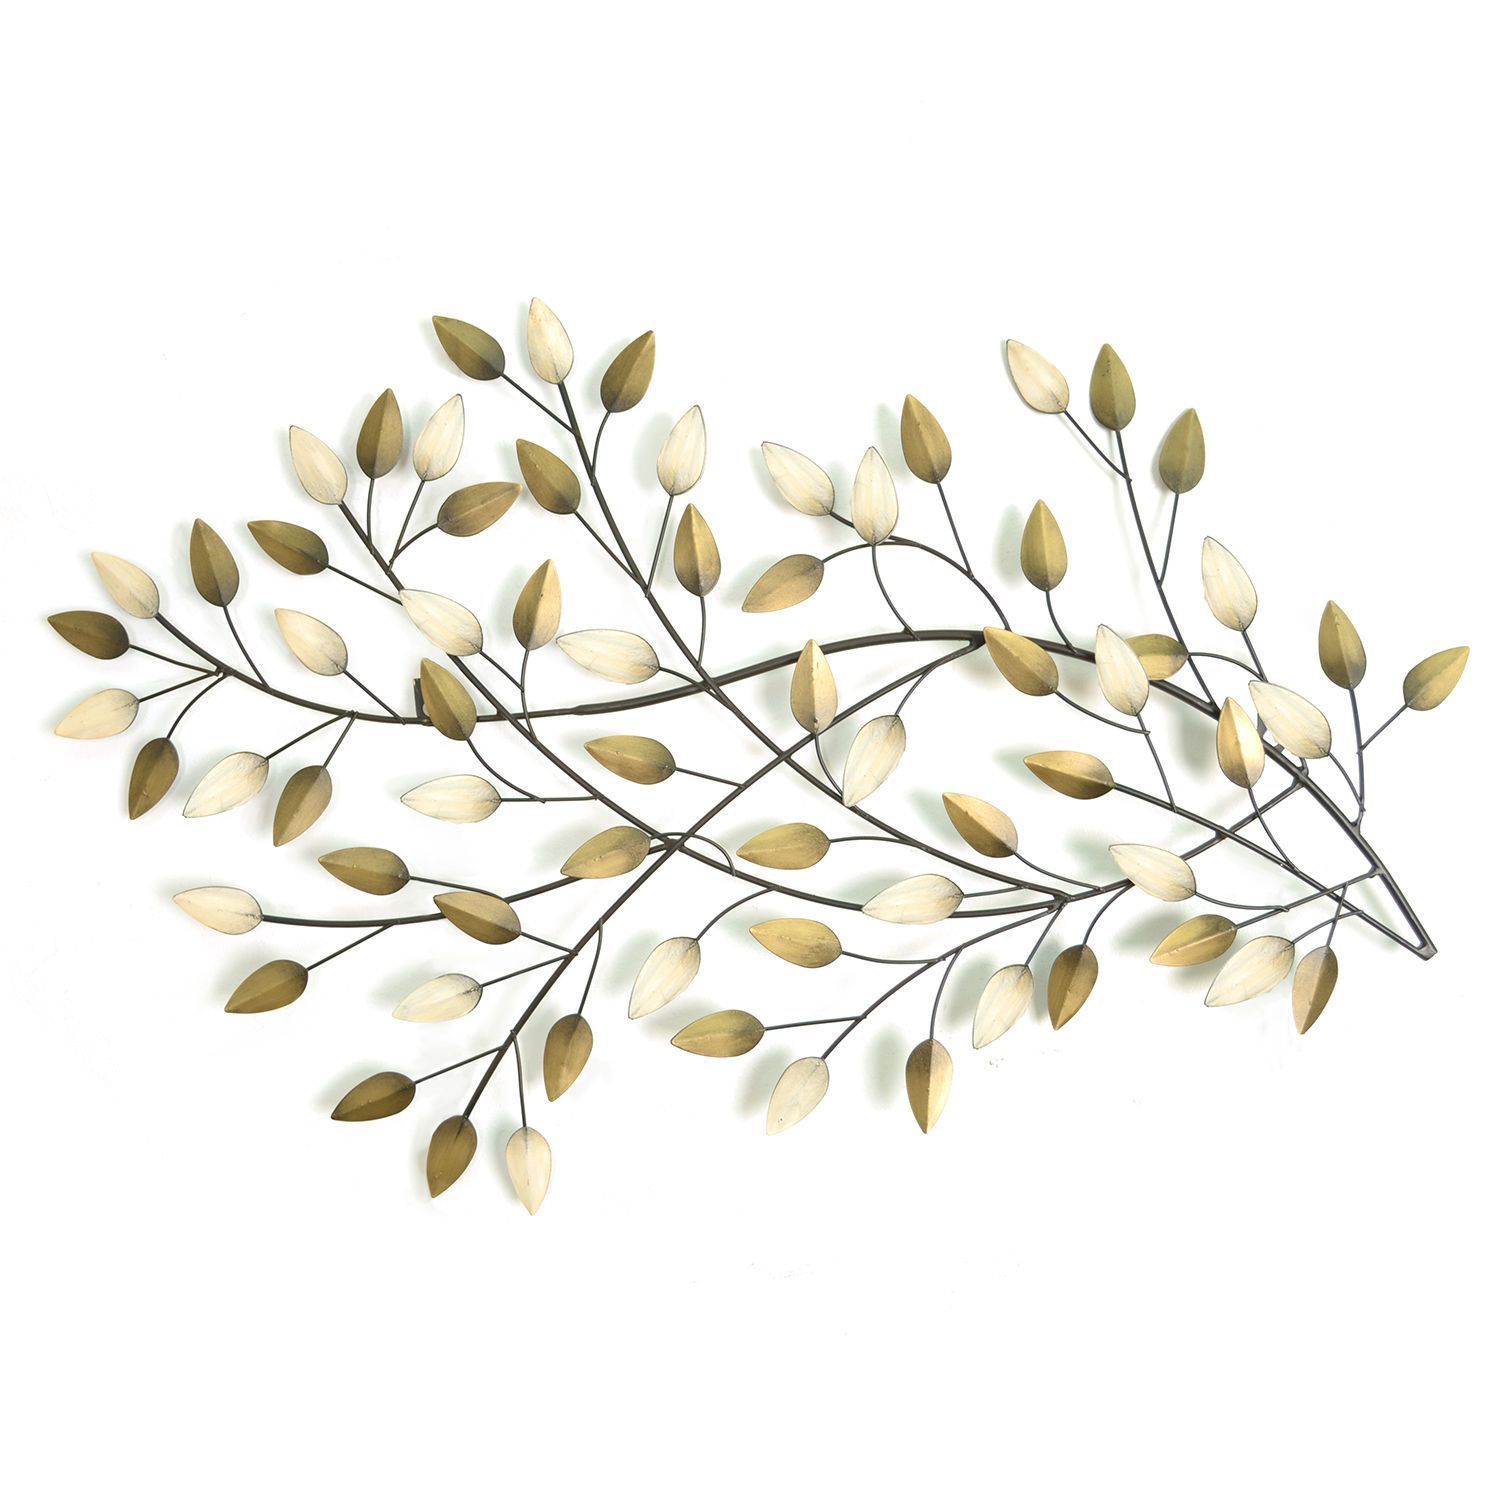 Stratton Home Blowing Leaves Wall Decor (gold/beige), Multi For Desford Leaf Wall Decor (View 9 of 30)